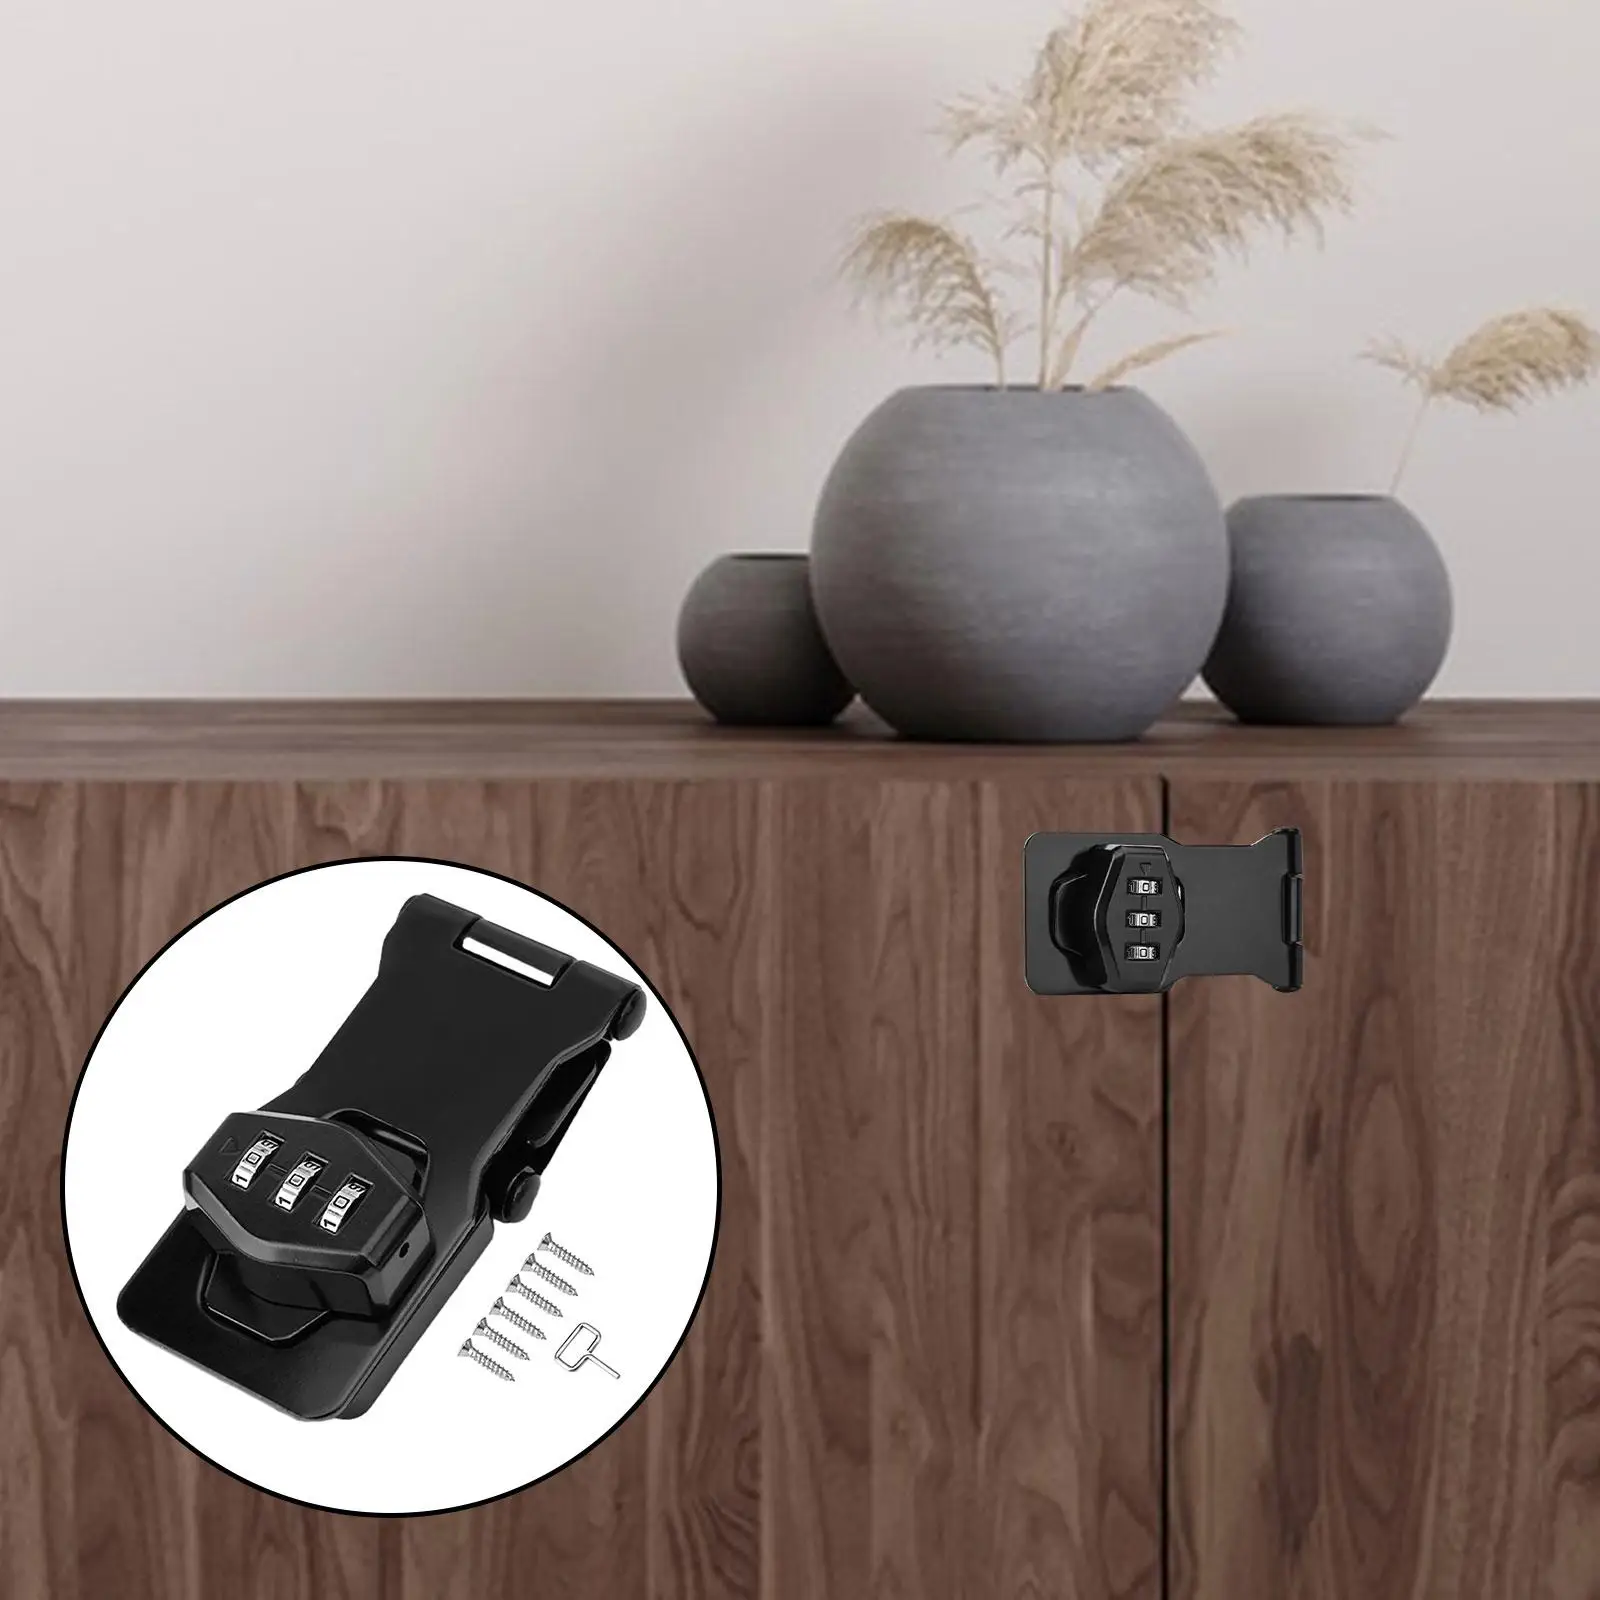 Cabinet Mechanical Combination Lock Left or Right Installed Privacy Latch for Barn Door Durable Multipurpose Easily Mounted